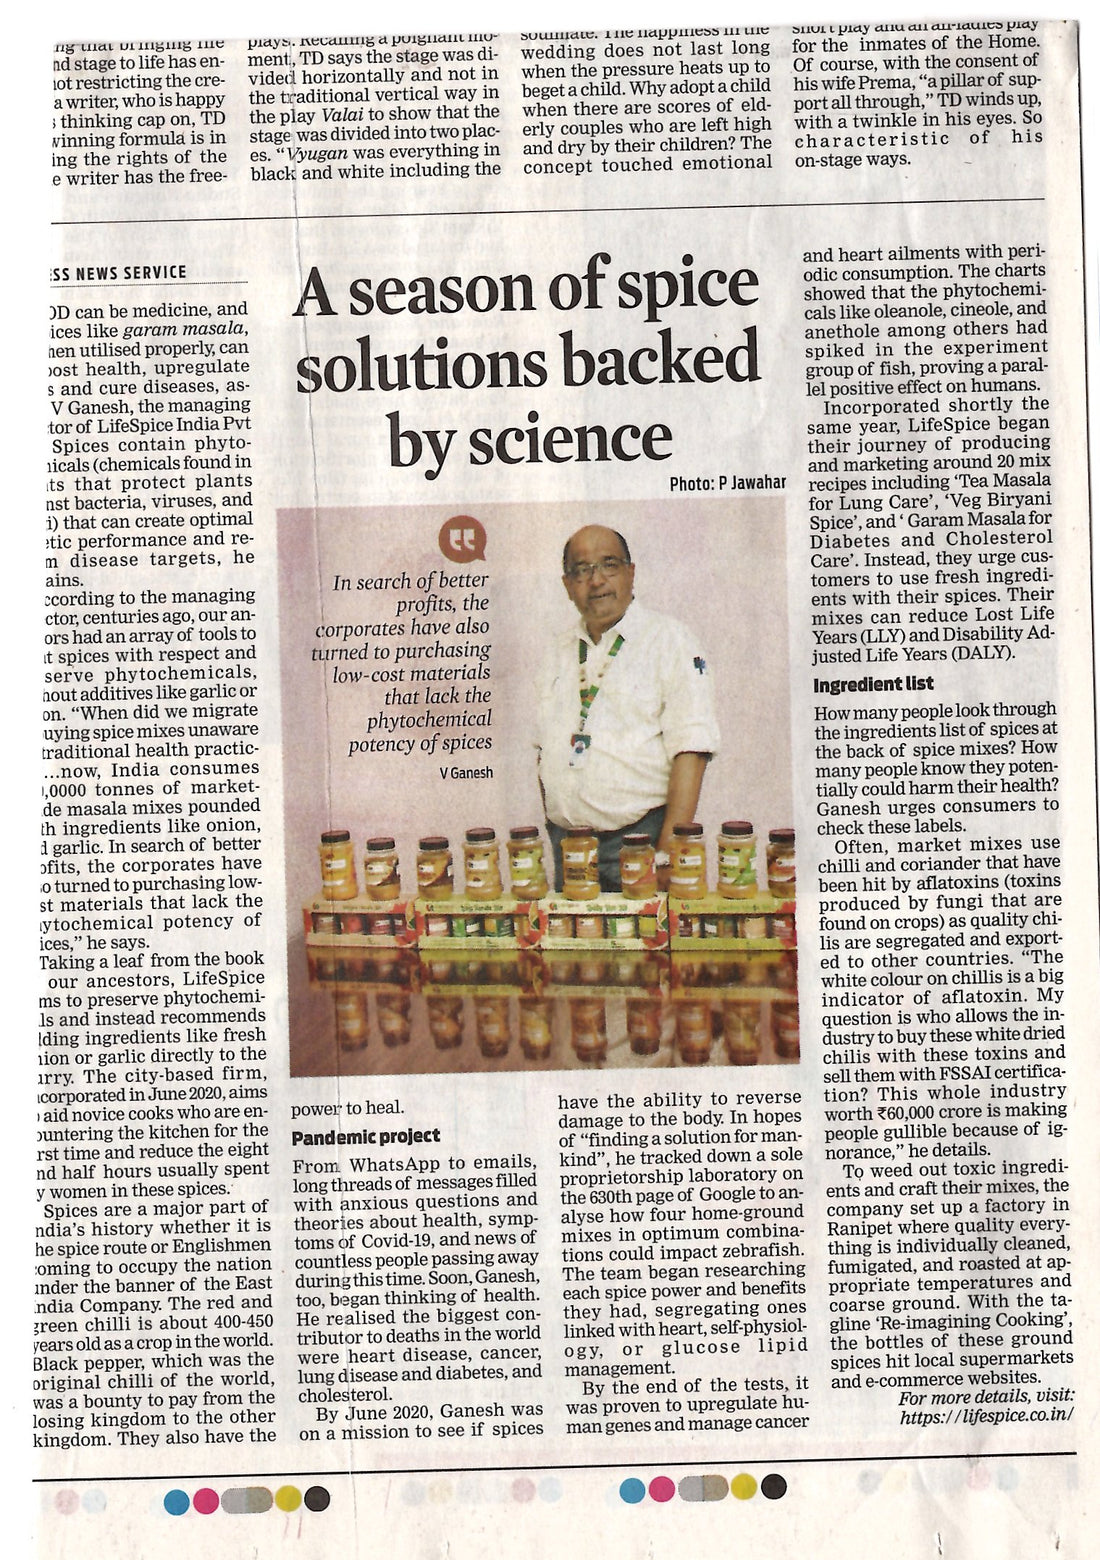 A season of spice solutions backed by science